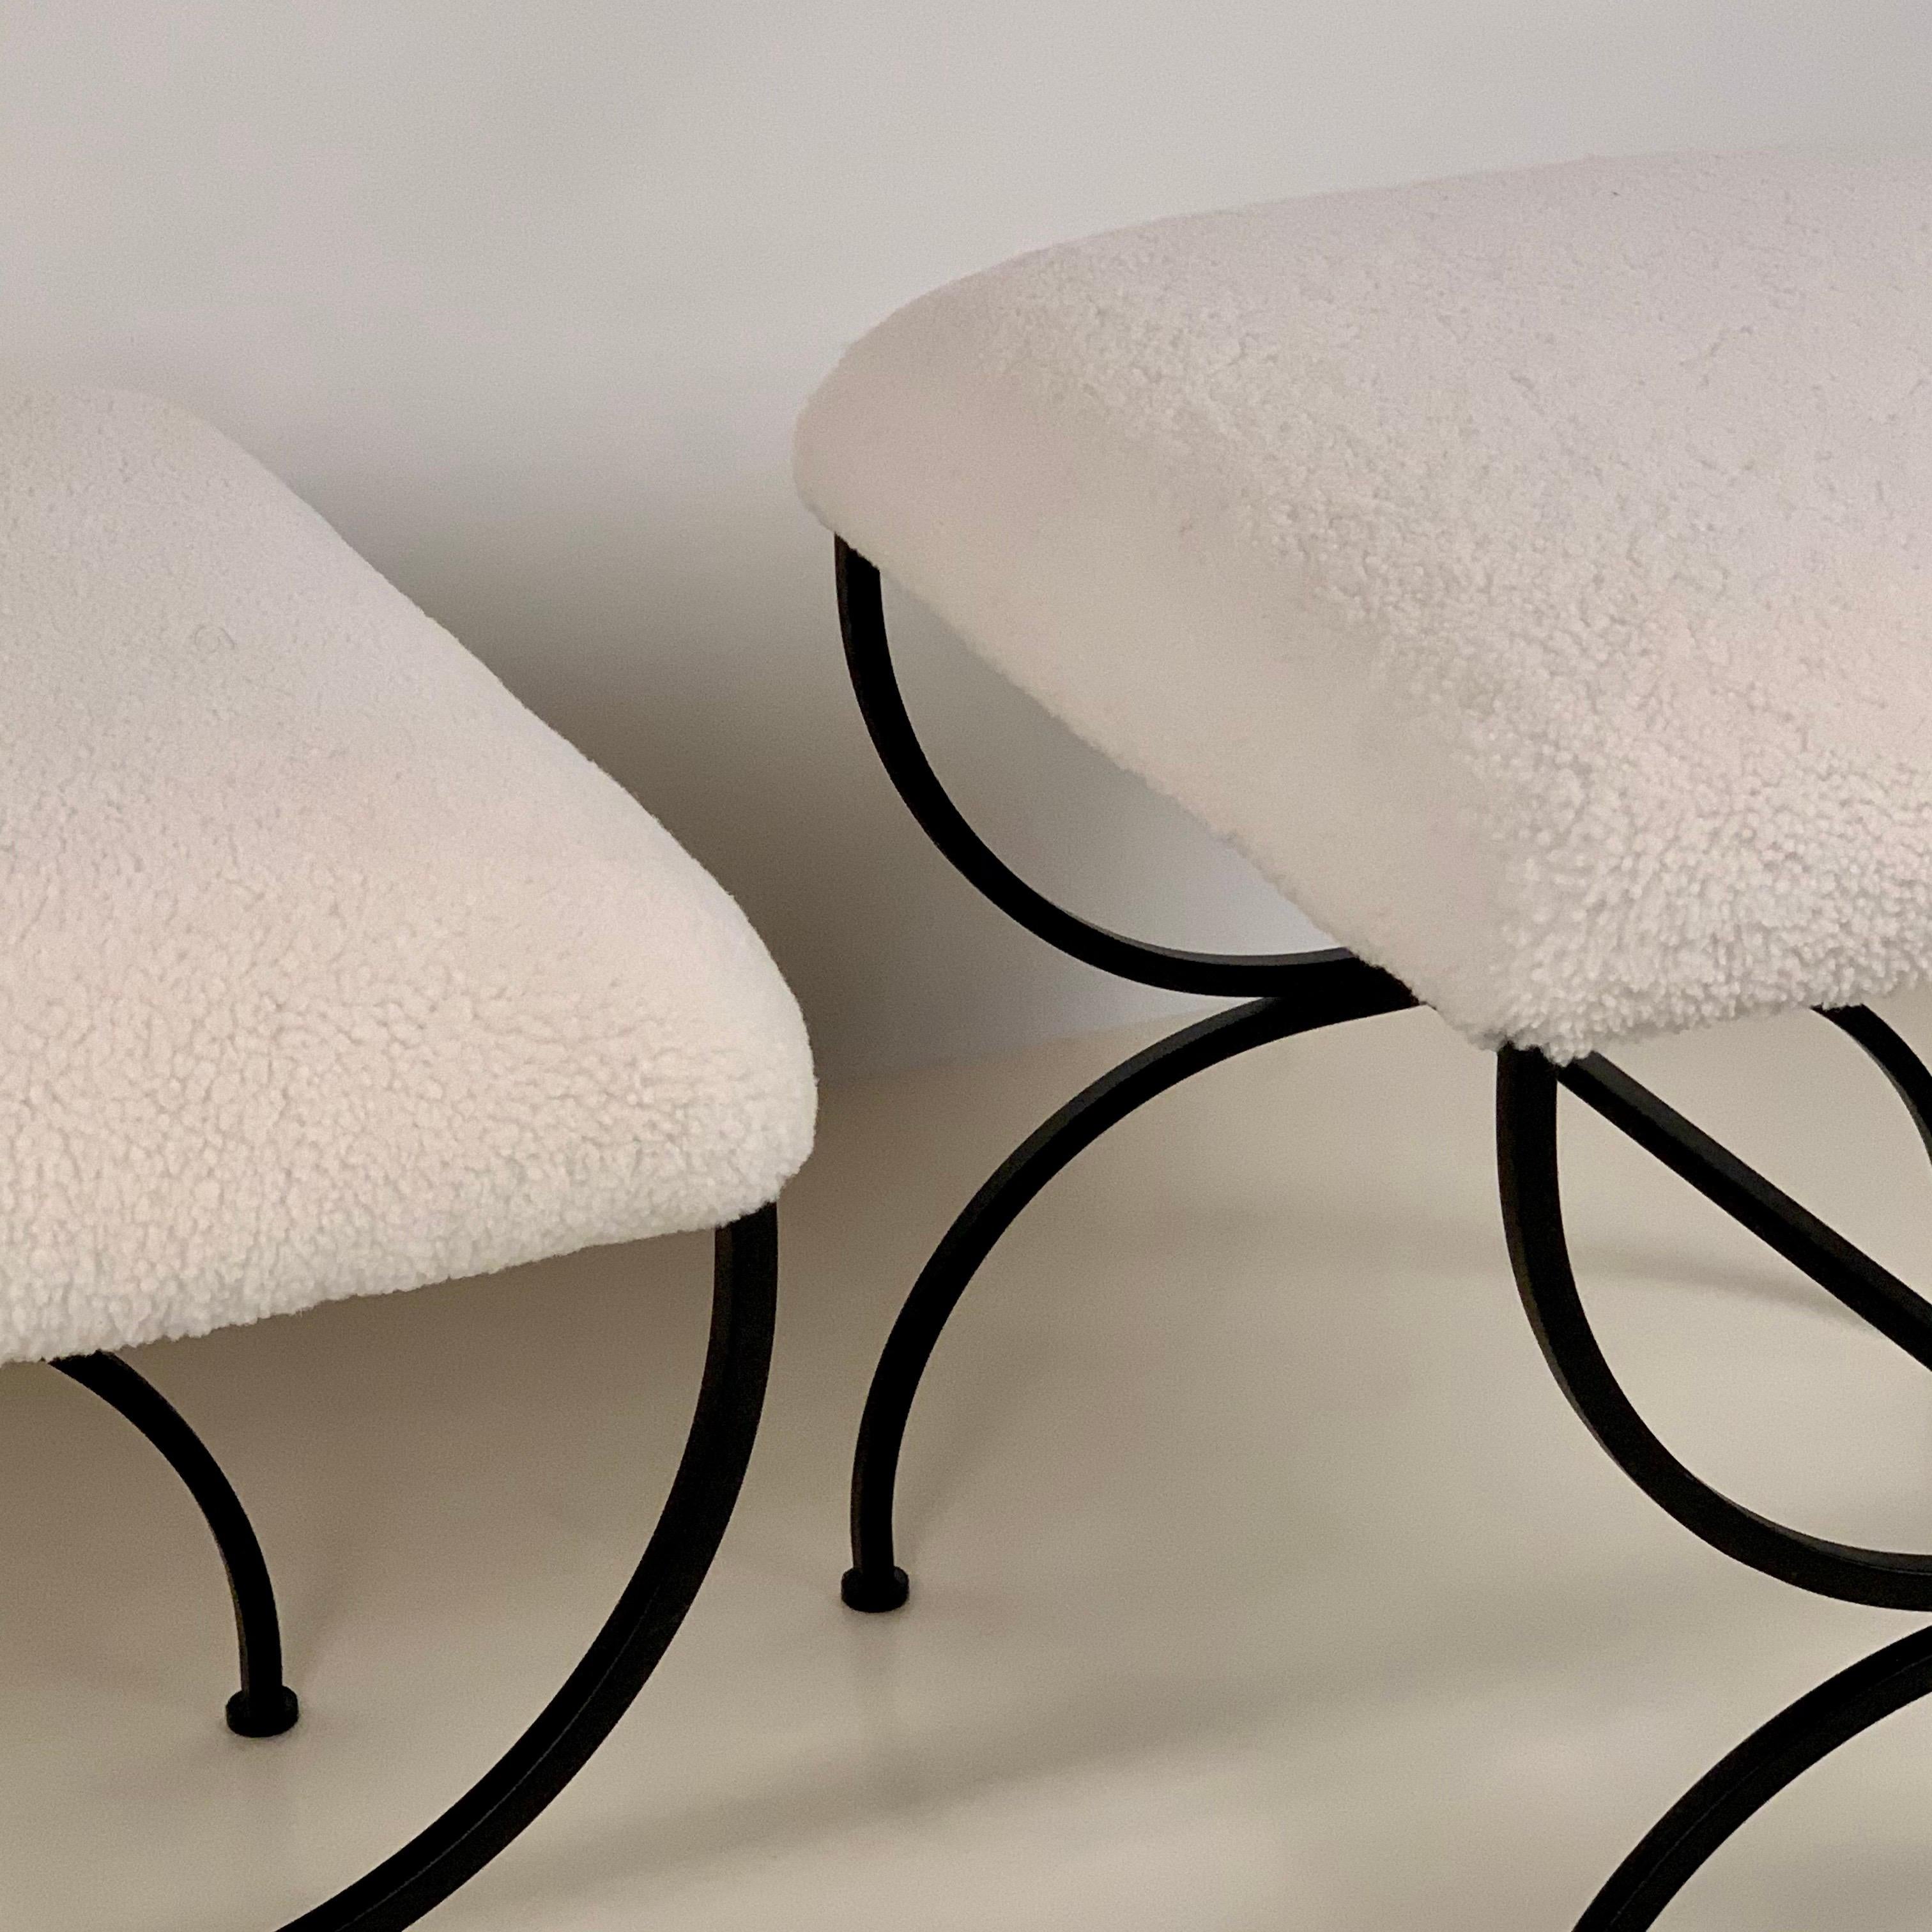 Powder-Coated Pair of Large 'Strapontin' Shearling Stools by Design Frères For Sale